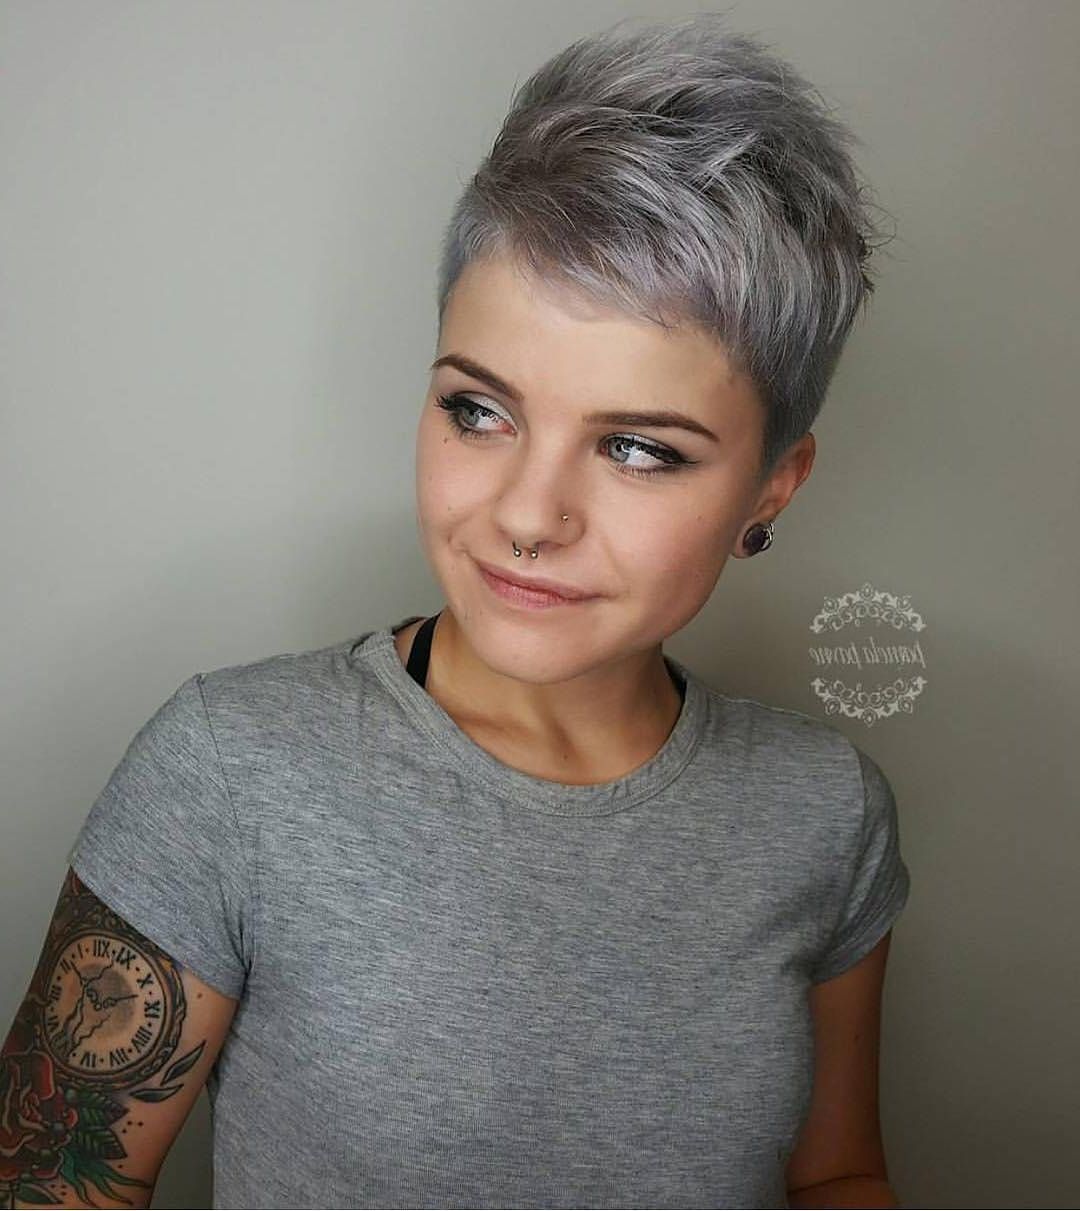 Partially Shaved Pixie Cut With Gray Coloring | Pixie Cuts In 2018 Intended For Ruffled Pixie Hairstyles (View 10 of 20)